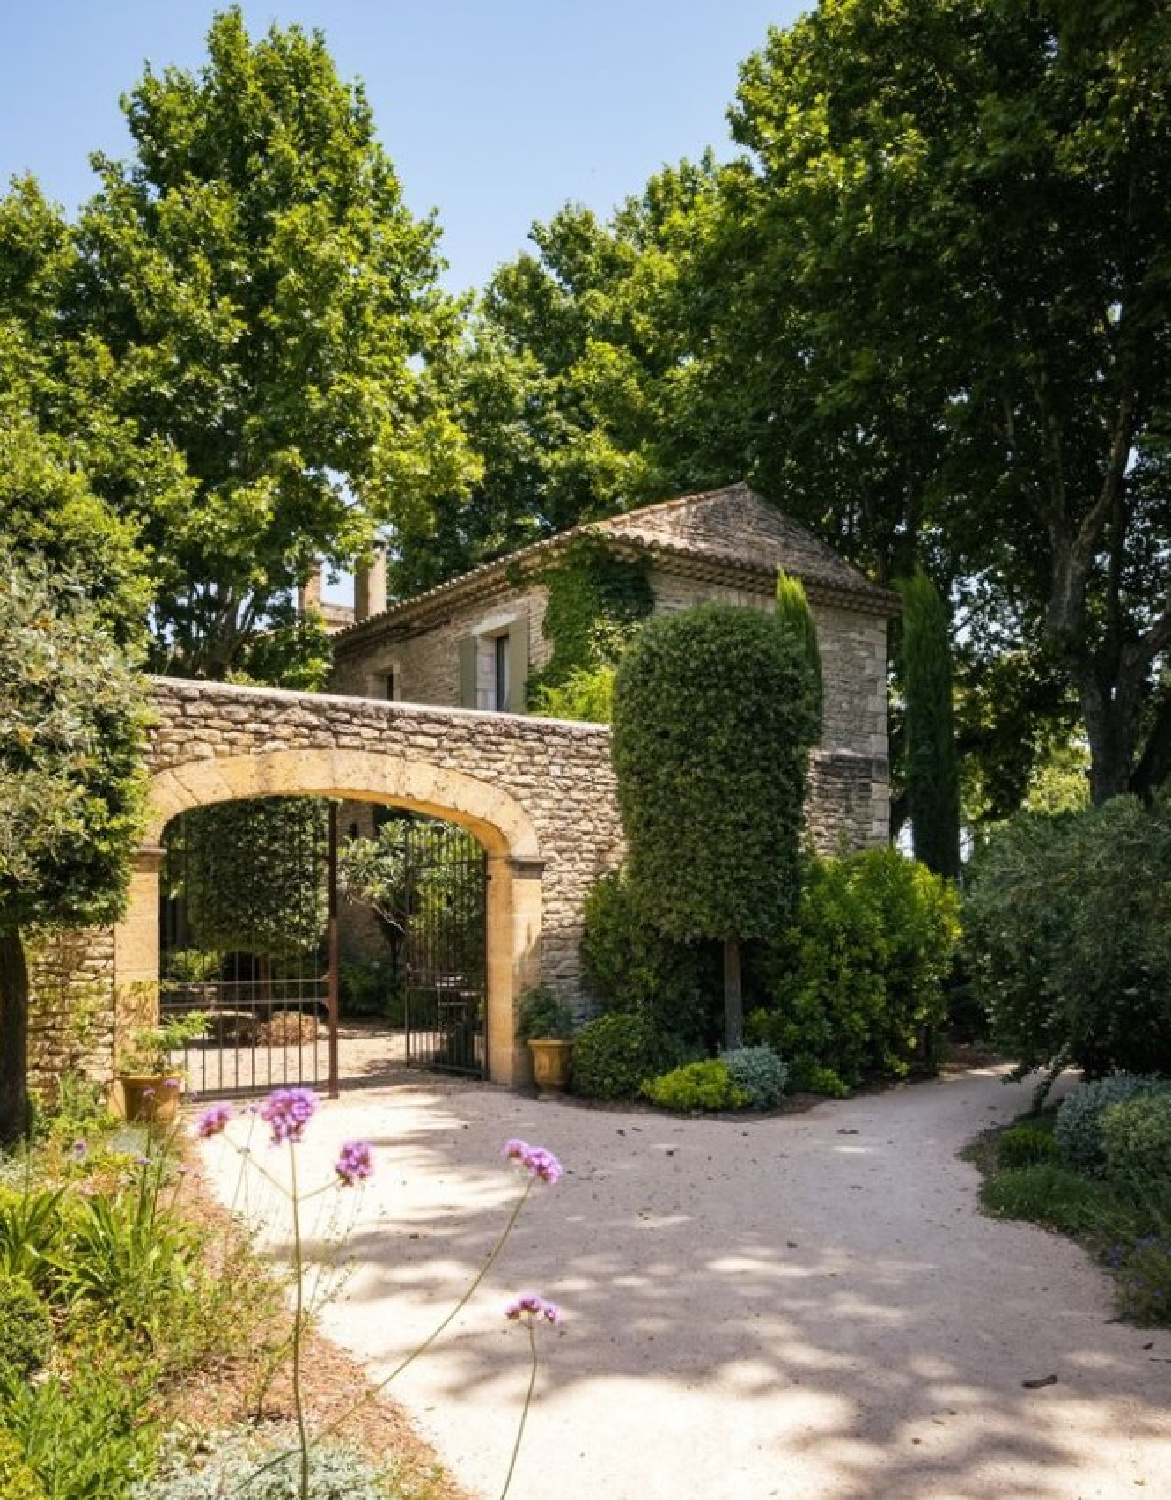 Courtyard - French country European luxury and cozy opulence in a French vacation villa in Provence - La Bastide de Laurence. #frenchbastide #frenchvilla #luxuryvilla #provencevilla #warmeuropeanluxury #cozyopulence #provencehomes #francetravel